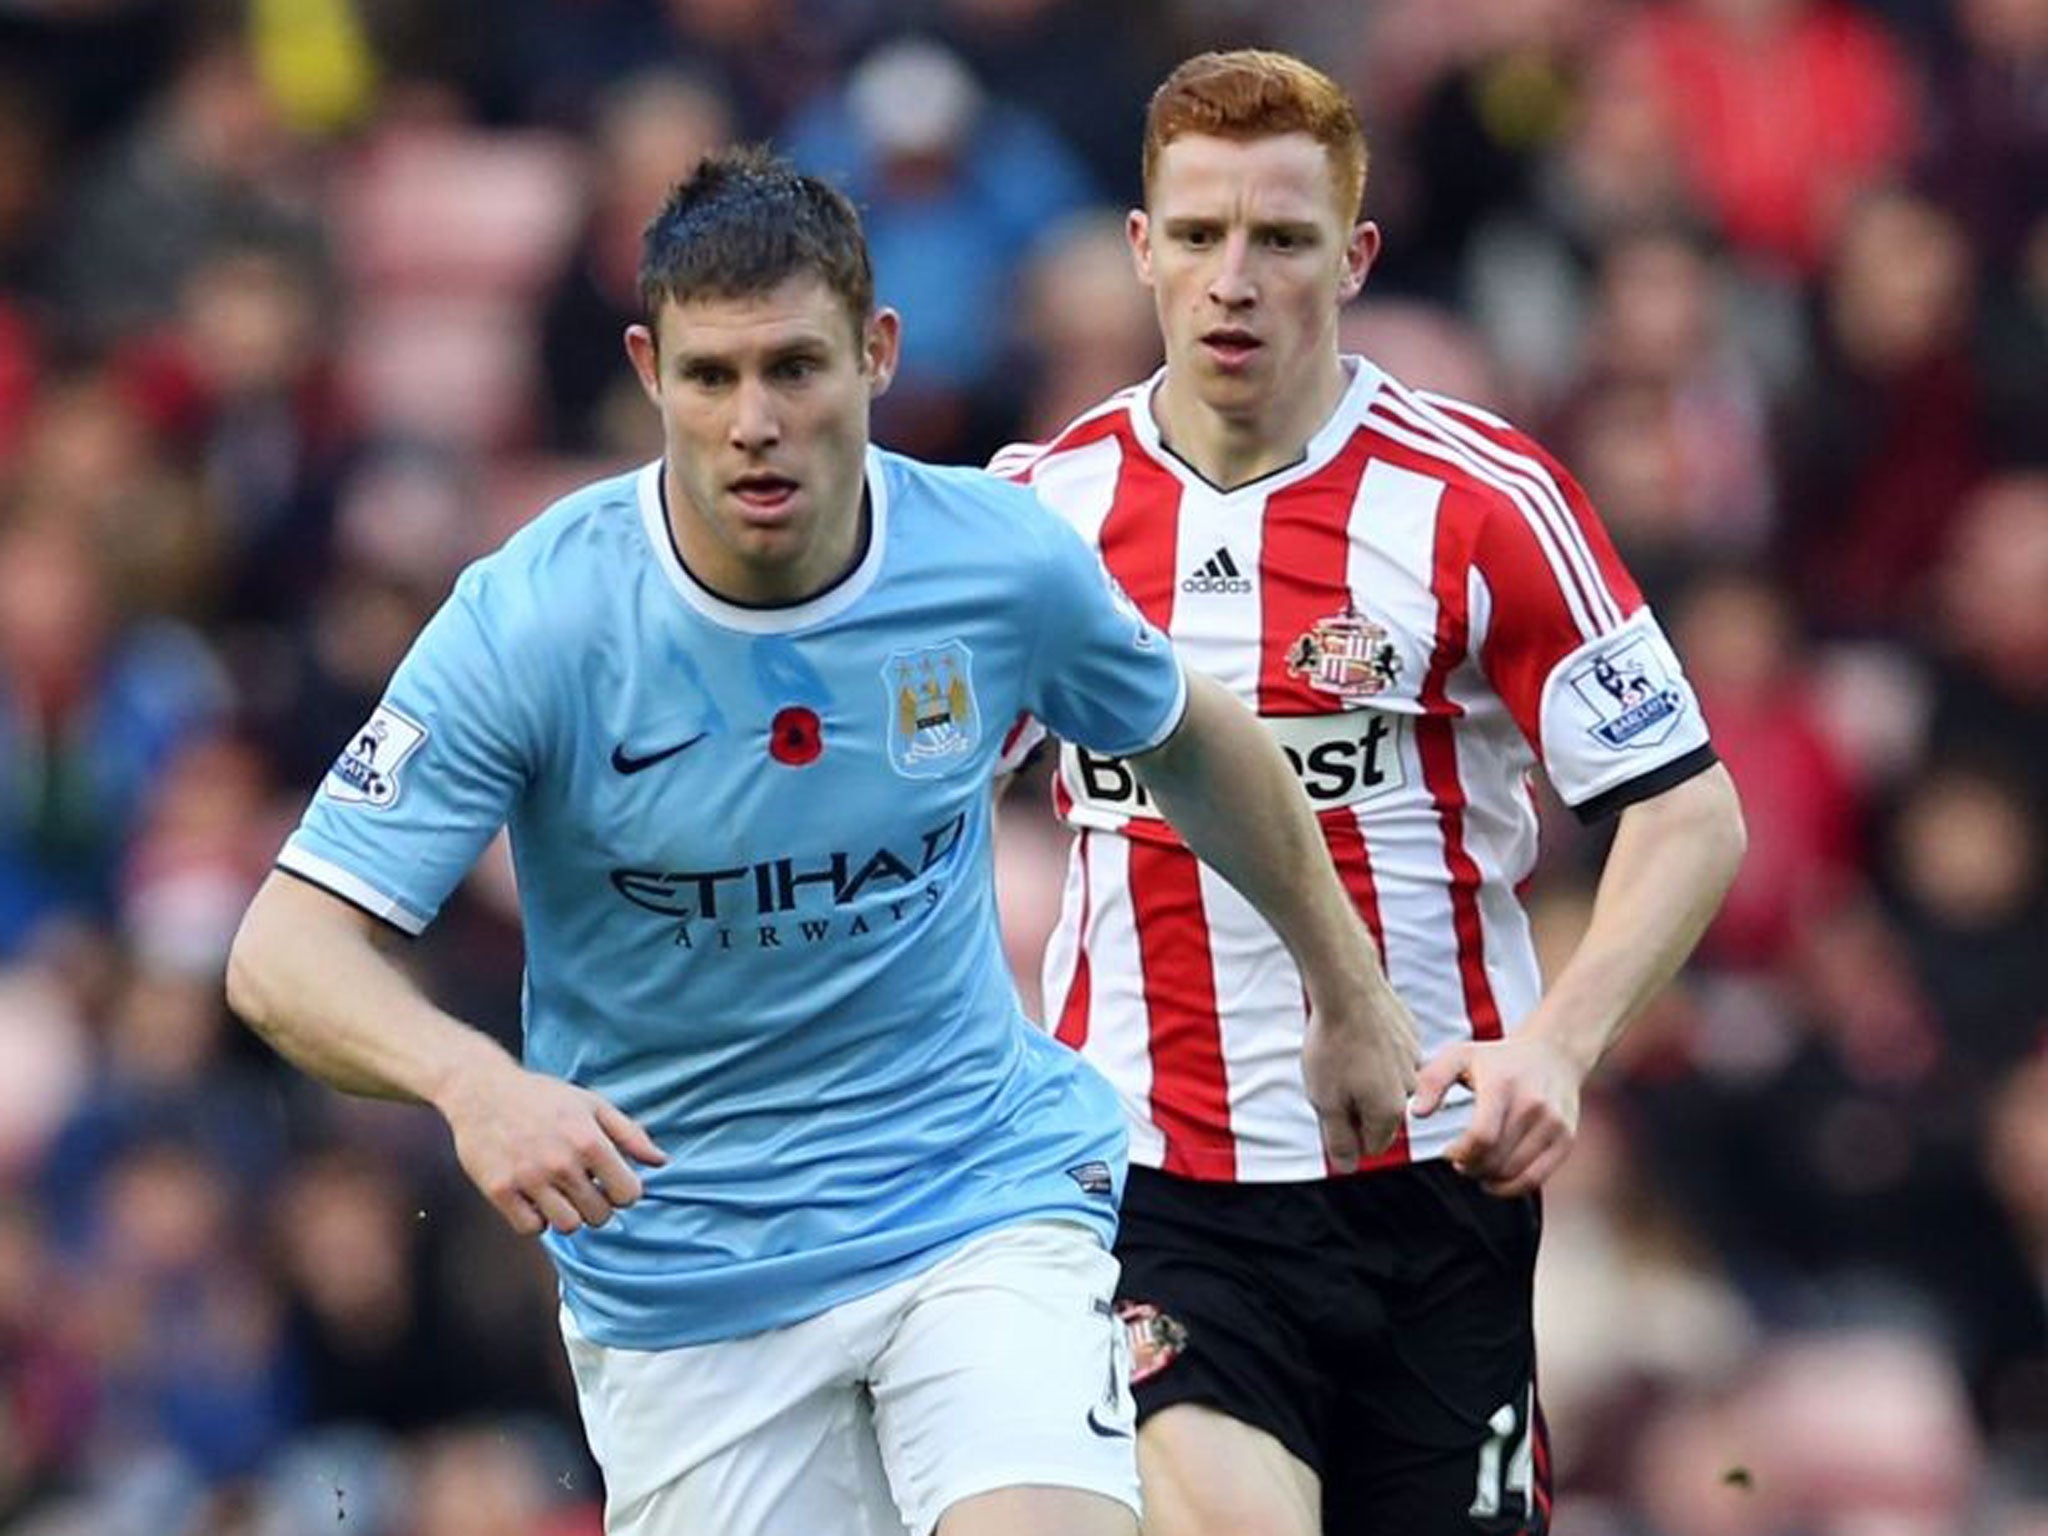 In the running: James MIlner (left) was on the losing side in November’s League match at Sunderland; he is not guaranteed a starting place today